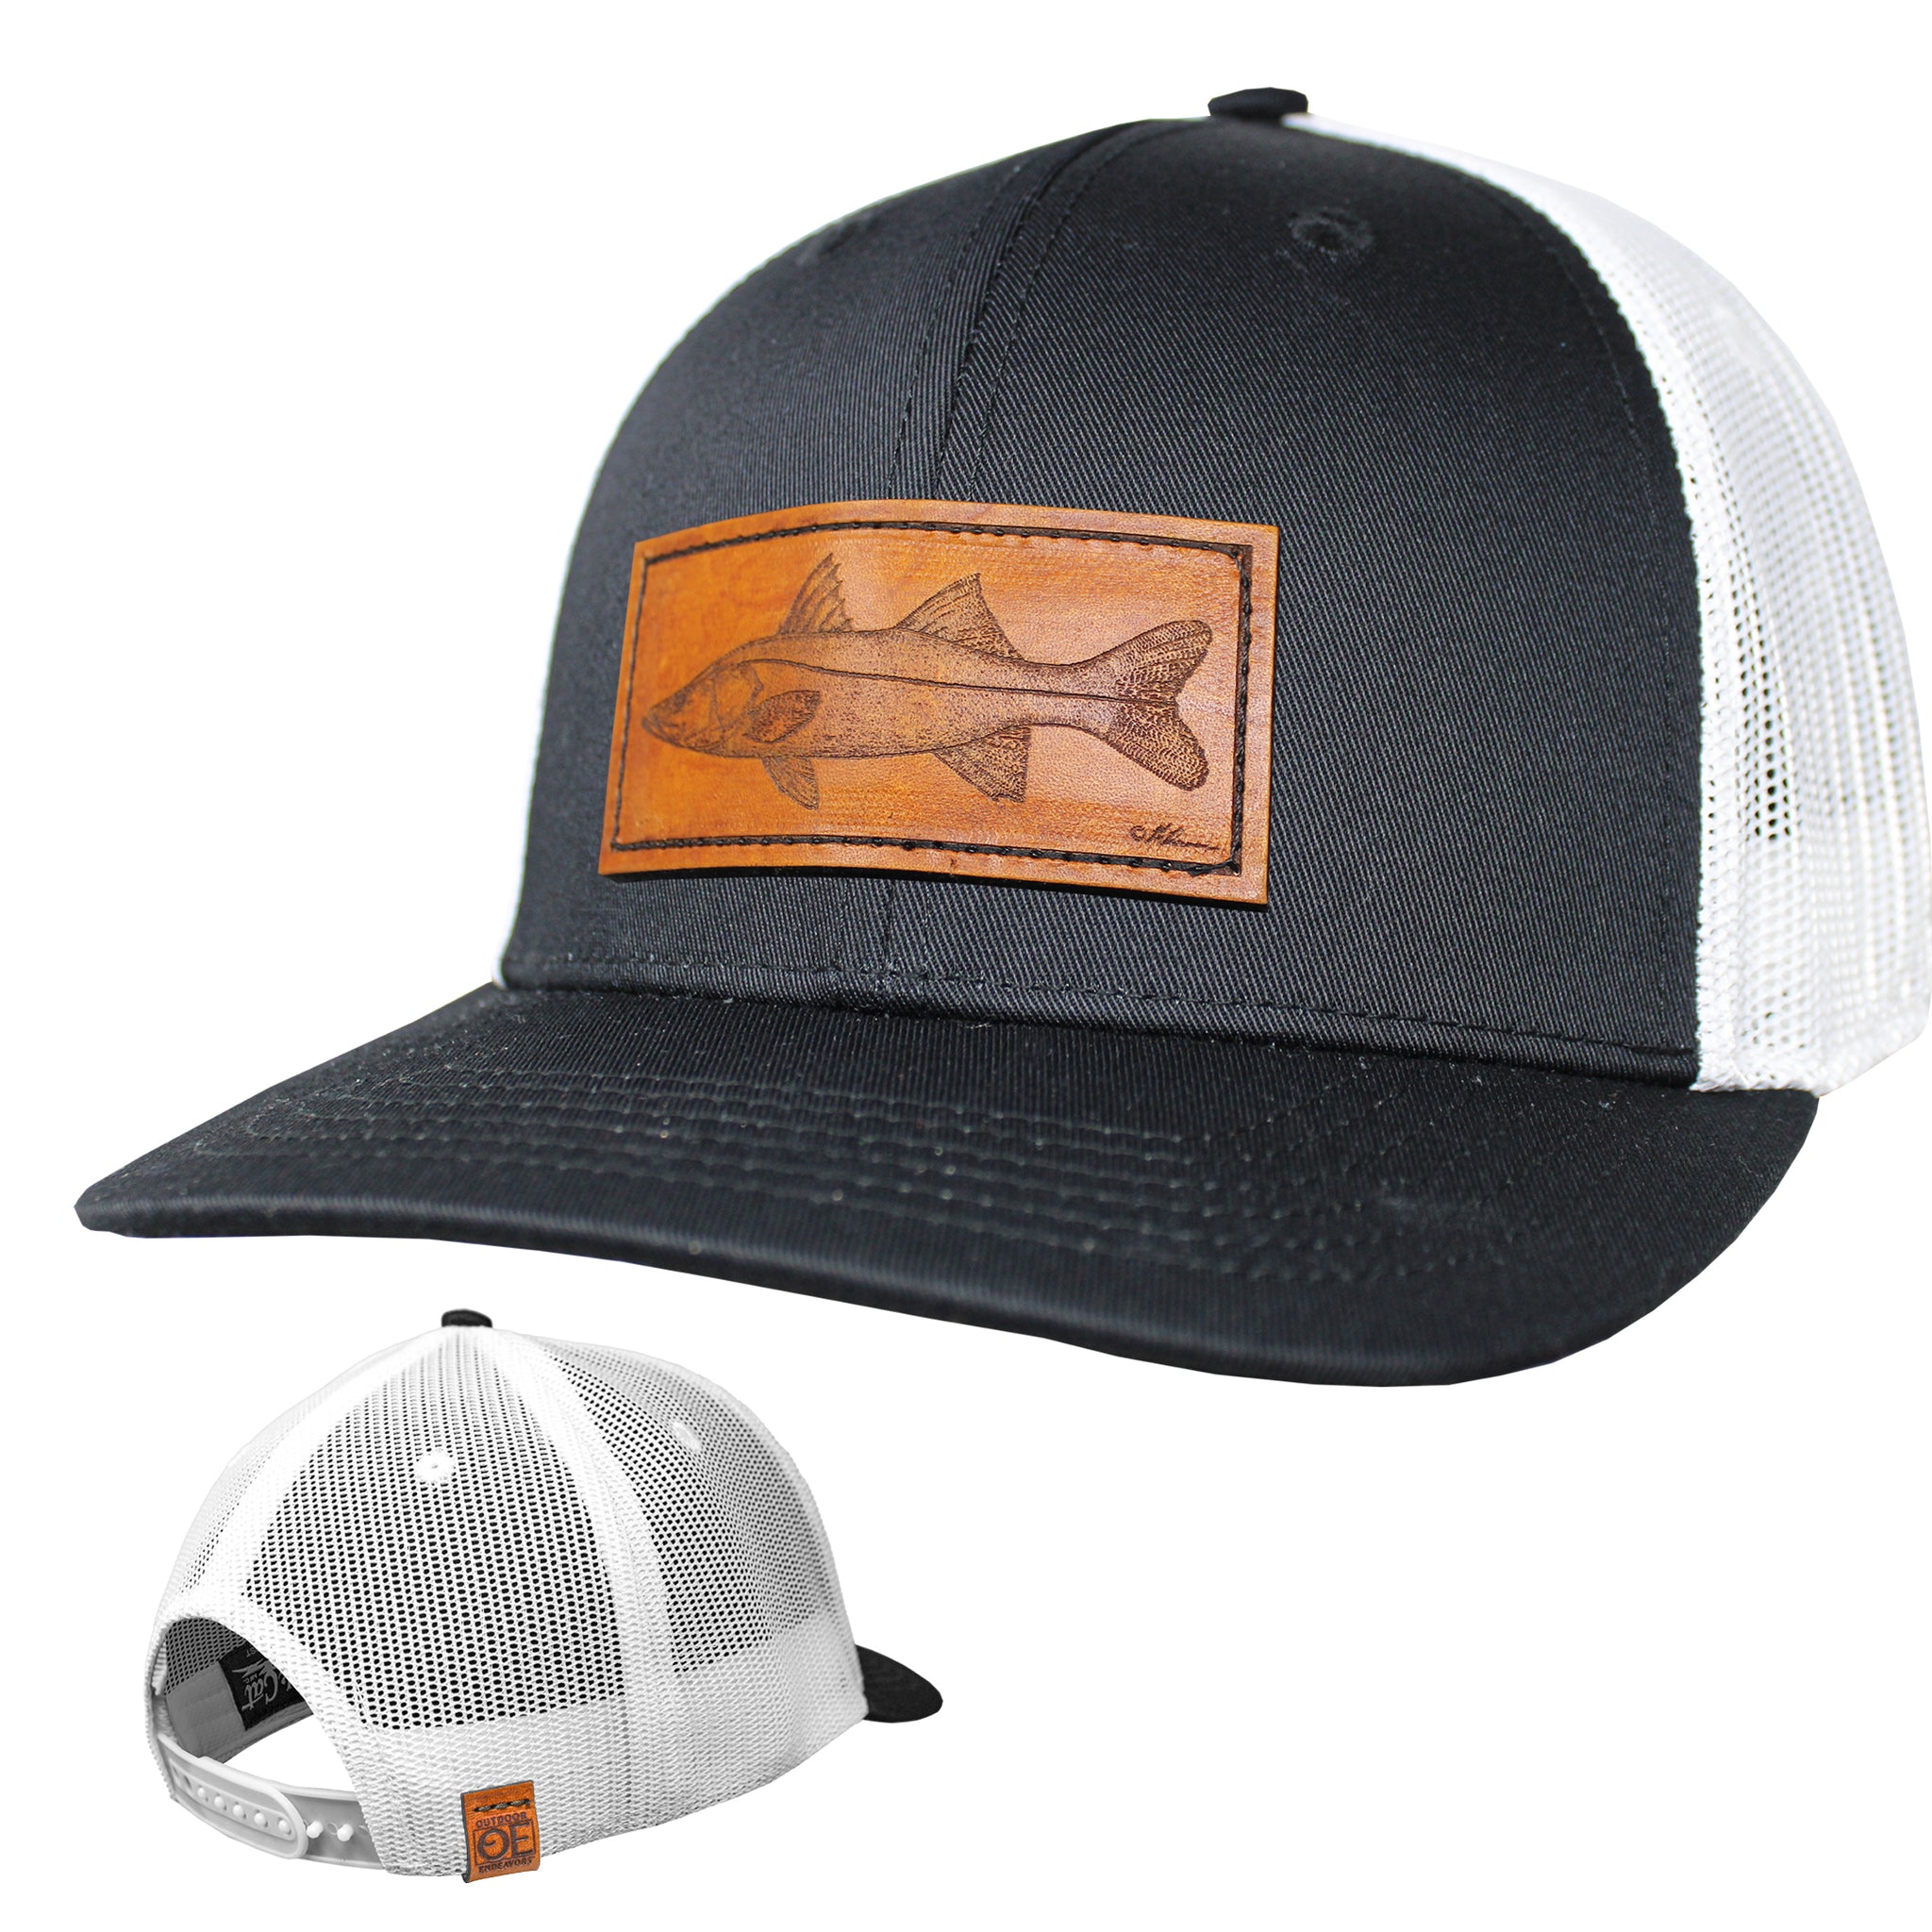 OE - Performance Trucker Hat - Snook Leather Patch